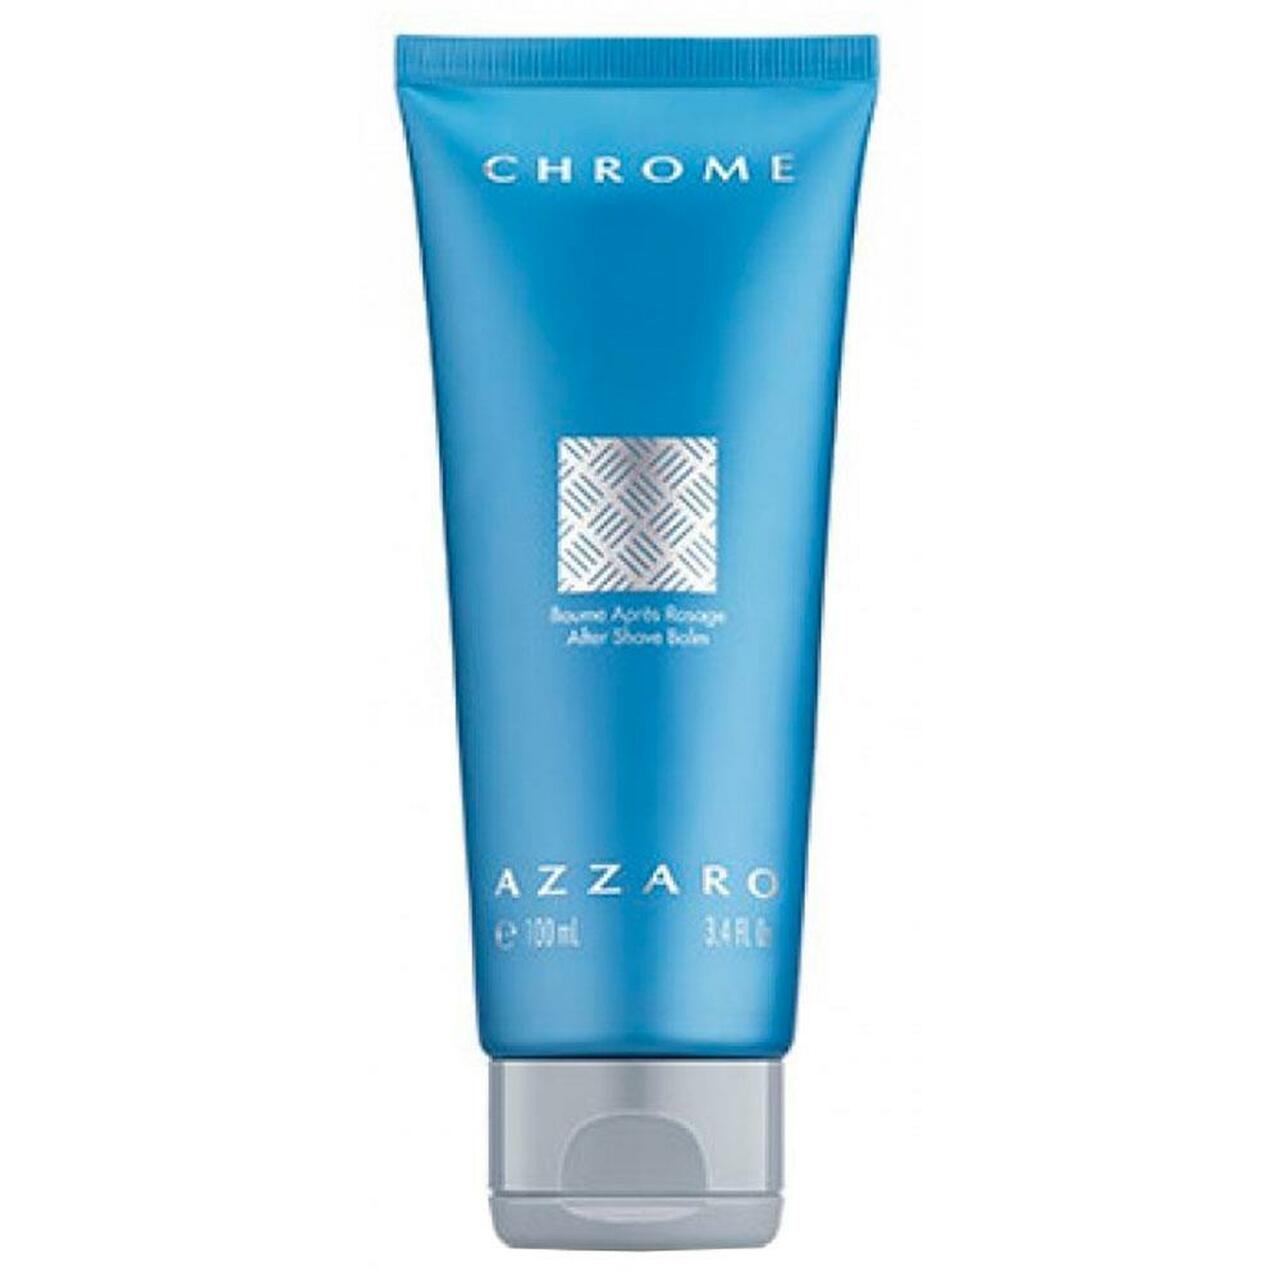 Azzaro Chrome After Shave Balm 100 ml - LookincredibleAzzaro3351500008896